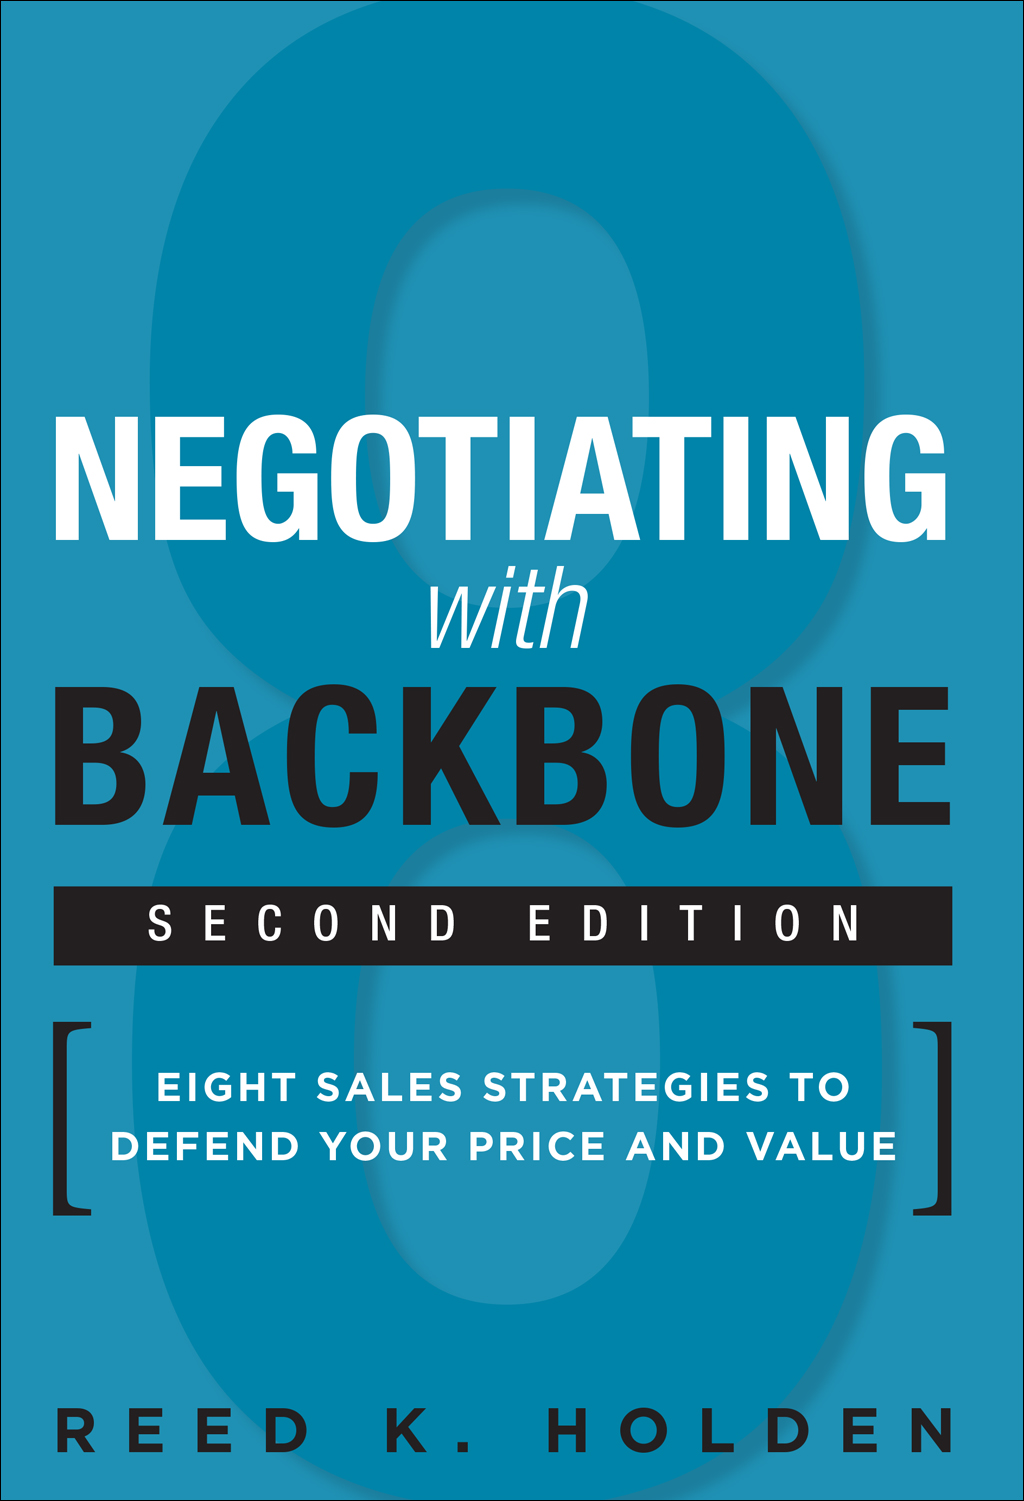 The Negotiating with Backbone line-up of services from Holden Advisors helps transform salespeople into value sellers who defend price and protect margin from unnecessary discounting.